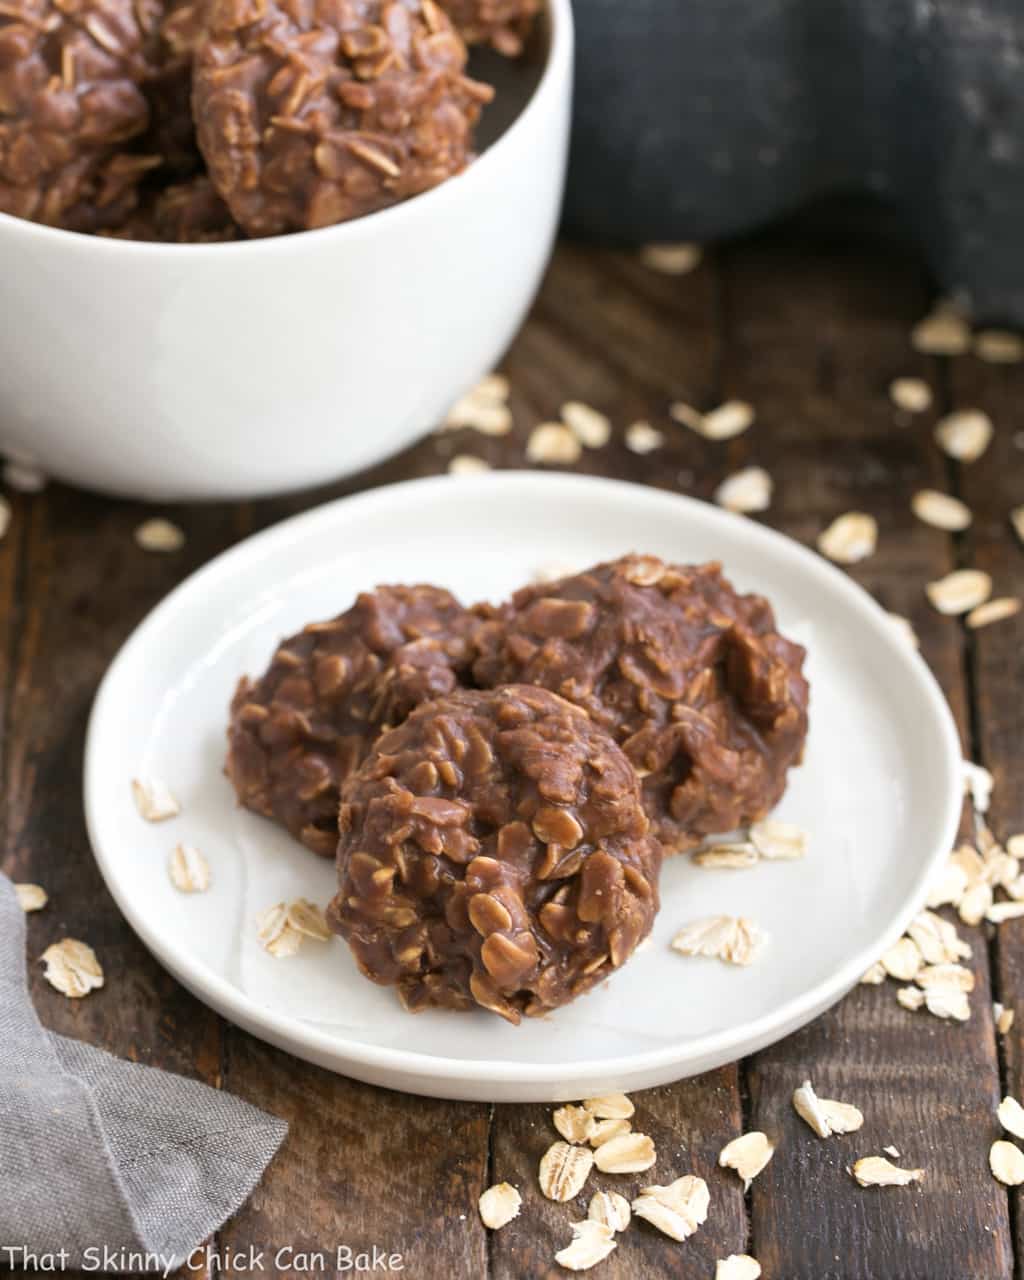 Classic No-Bake Cookies - Live Well Bake Often